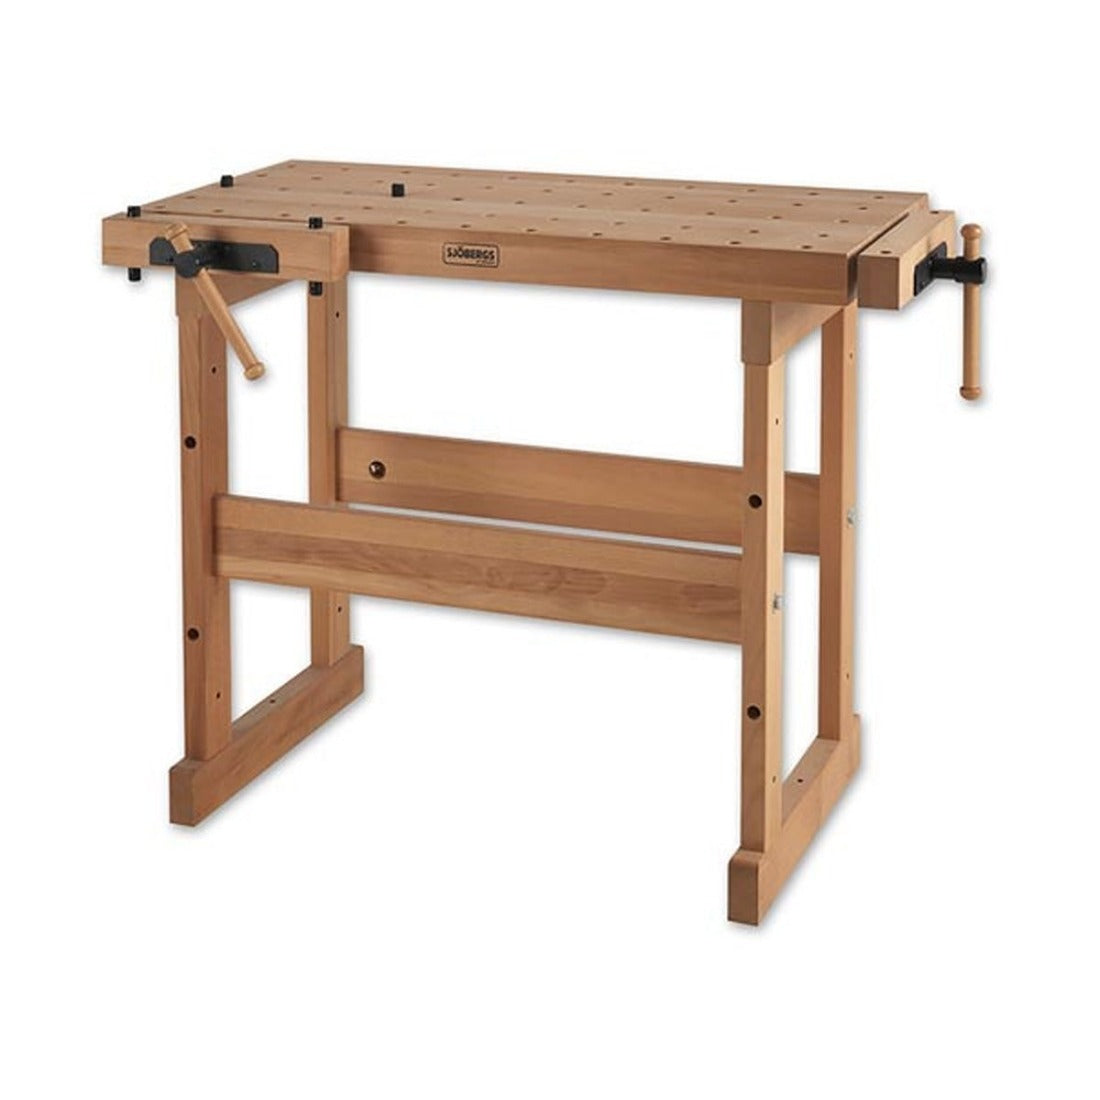 Sjobergs 1060 multi hole work bench with vices at the rear or front and one on the side. 